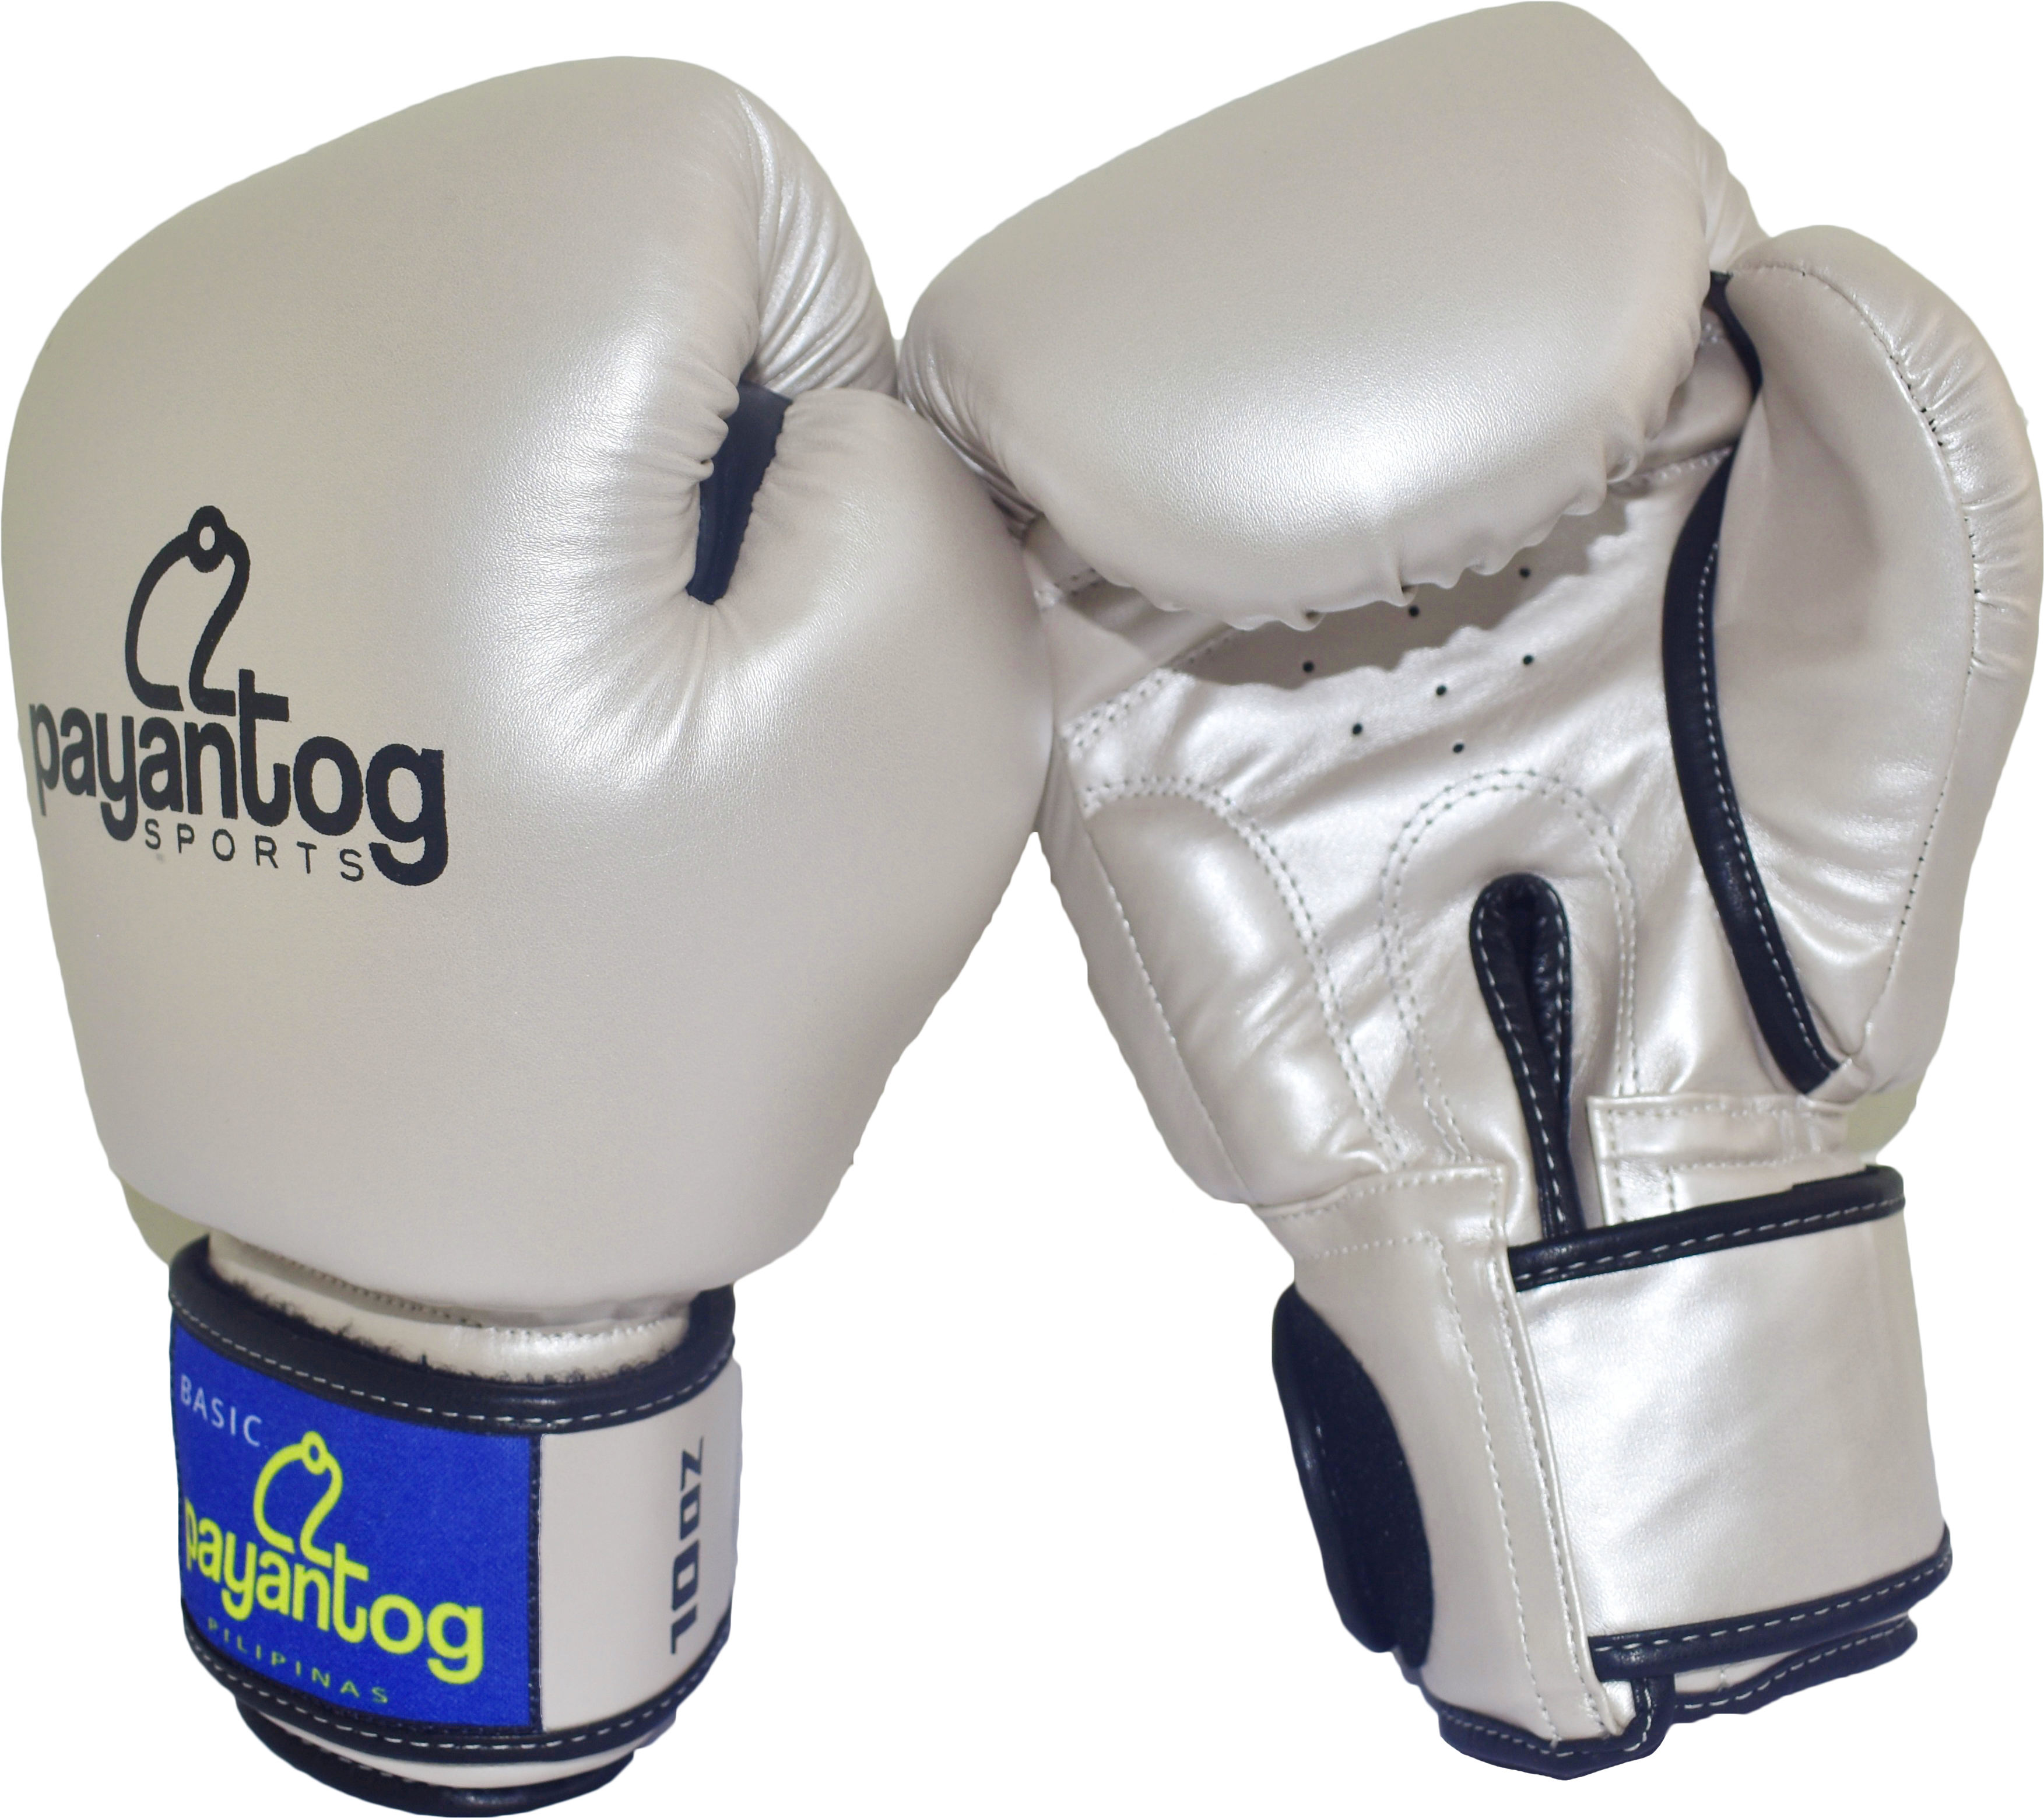 Silver Boxing Gloves Payantog Sports